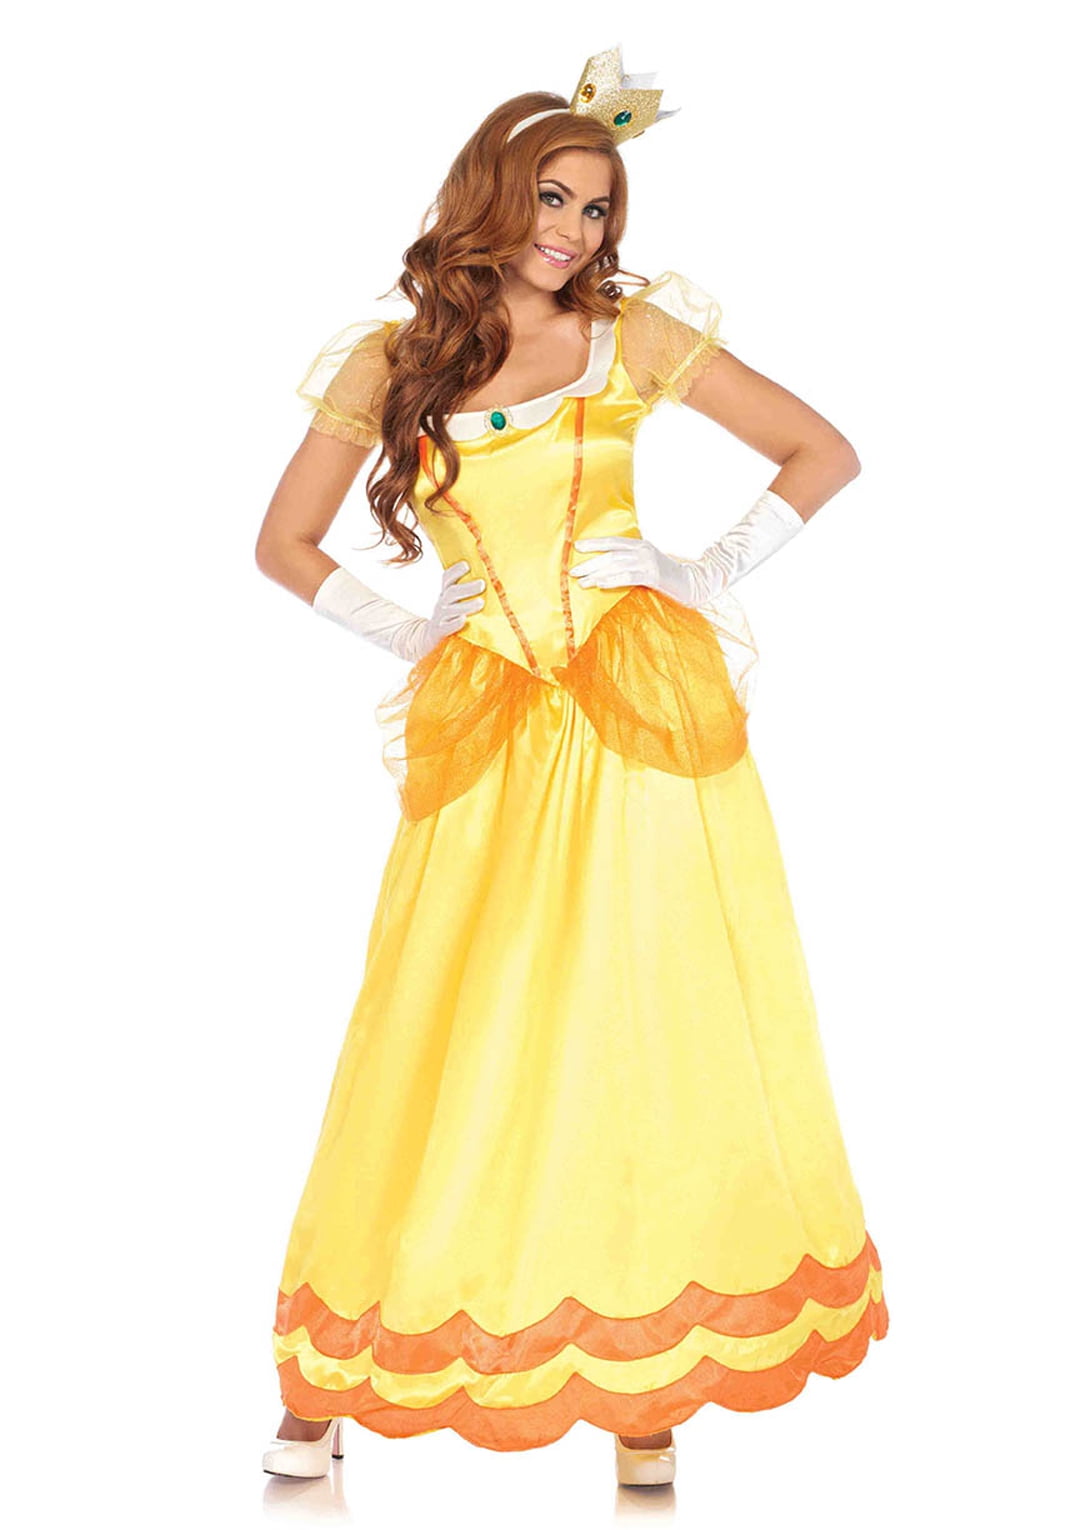 Princess Daisy Women's Costume Super Mario Bros Cosplay Dress Gown Adult Yellow 